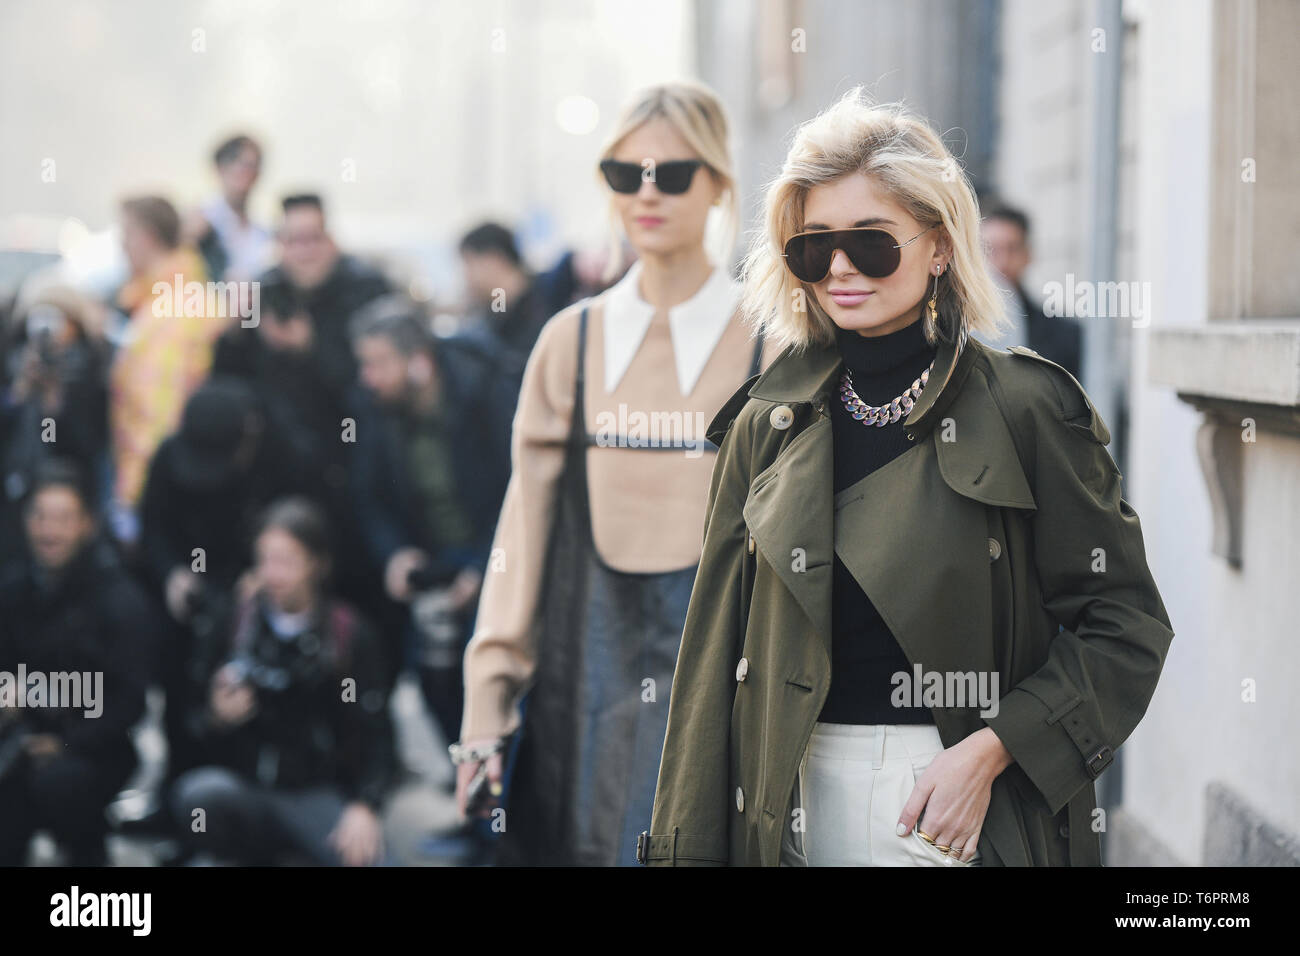 Milan, Italy - February 22, 2019: Street style – Influencer Xenia Adonts  wearing a Burberry coat before a fashion show during Milan Fashion Week -  MFW Stock Photo - Alamy